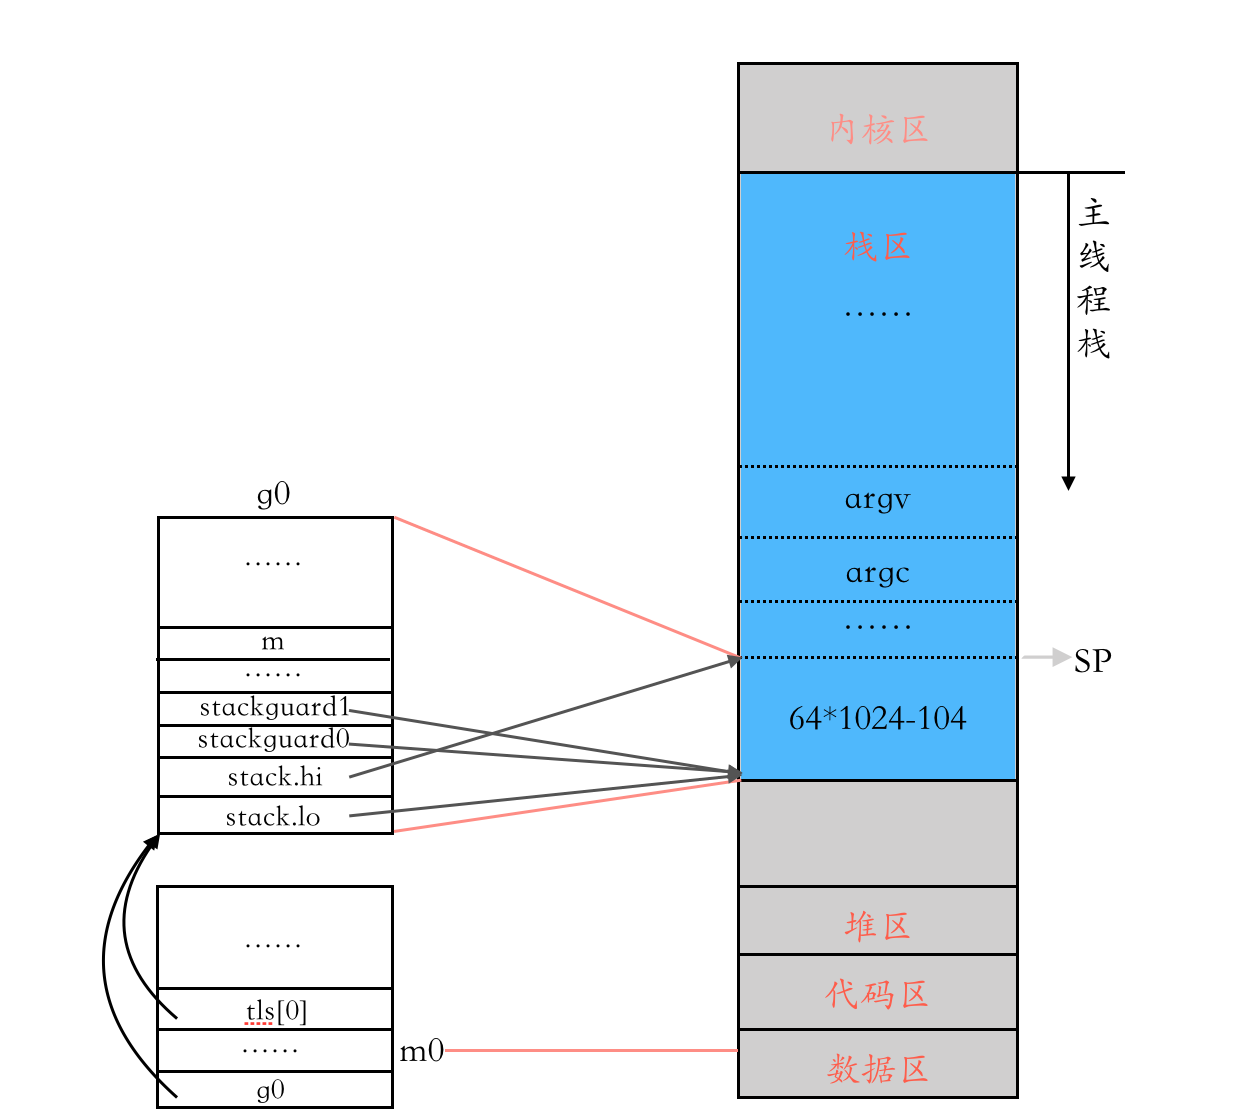 process memory space layout